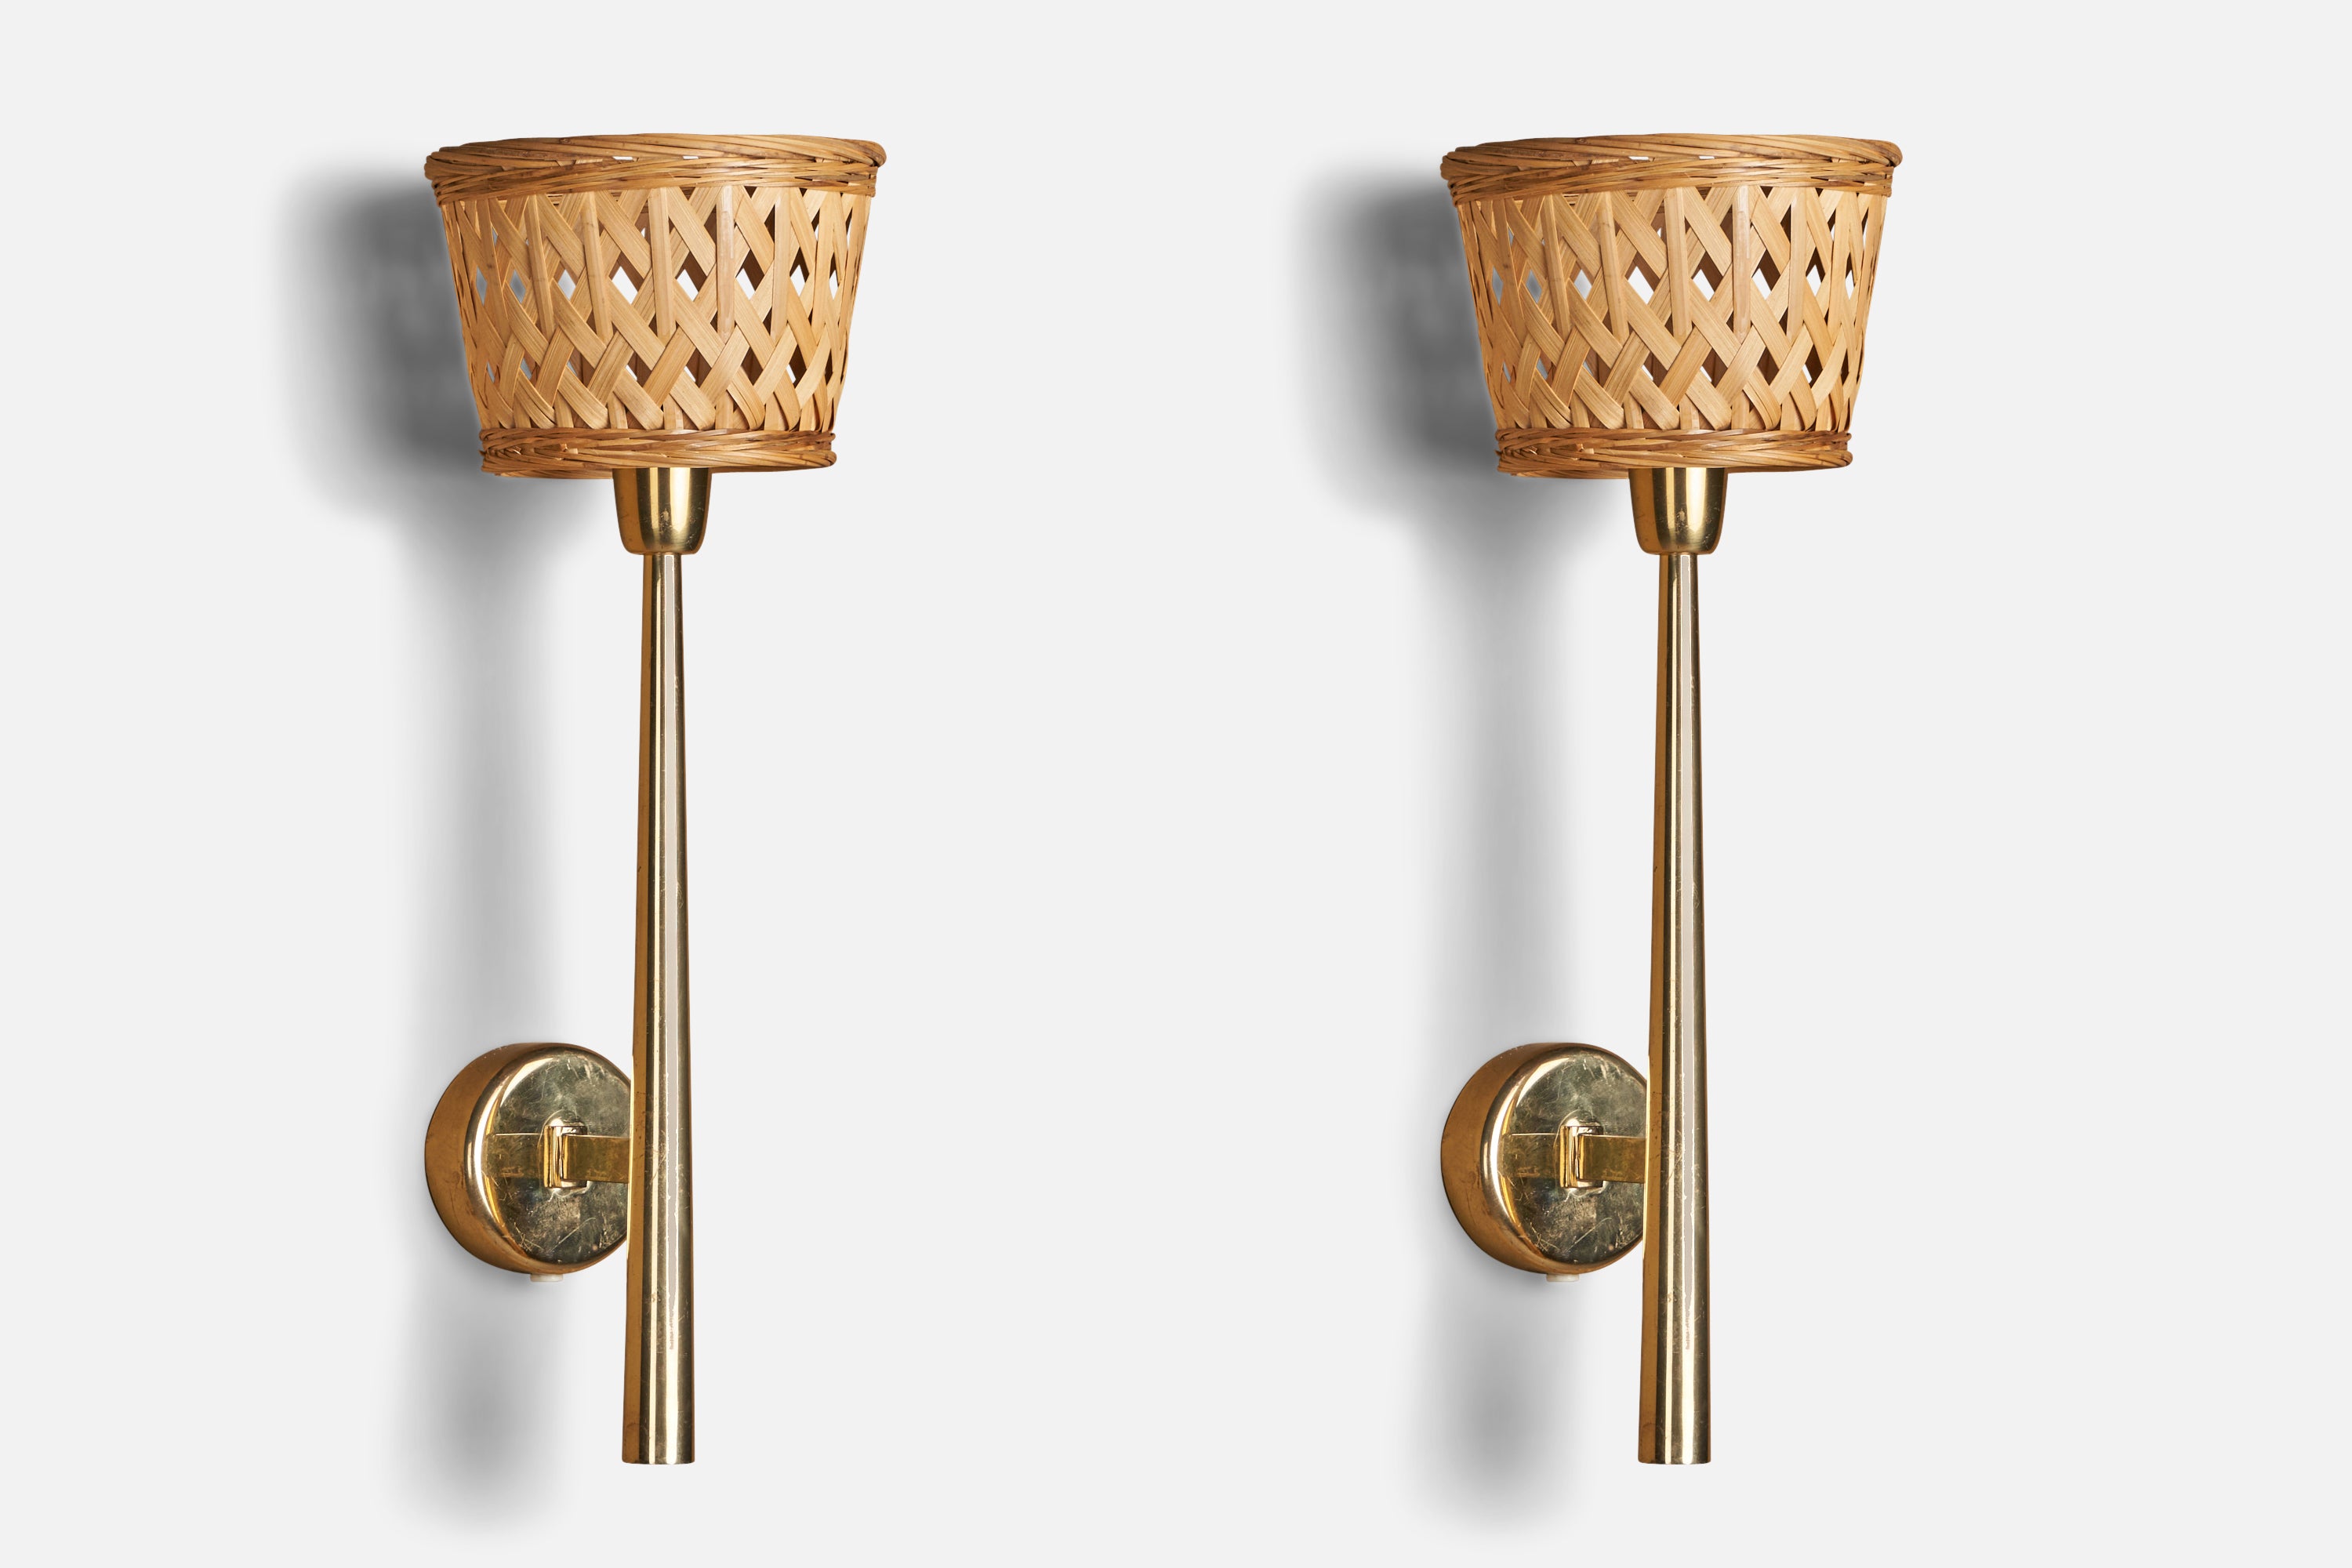 A pair of brass and rattan wall lights, designed and produced in Denmark, 1940s.

Overall Dimensions (inches): 17.75